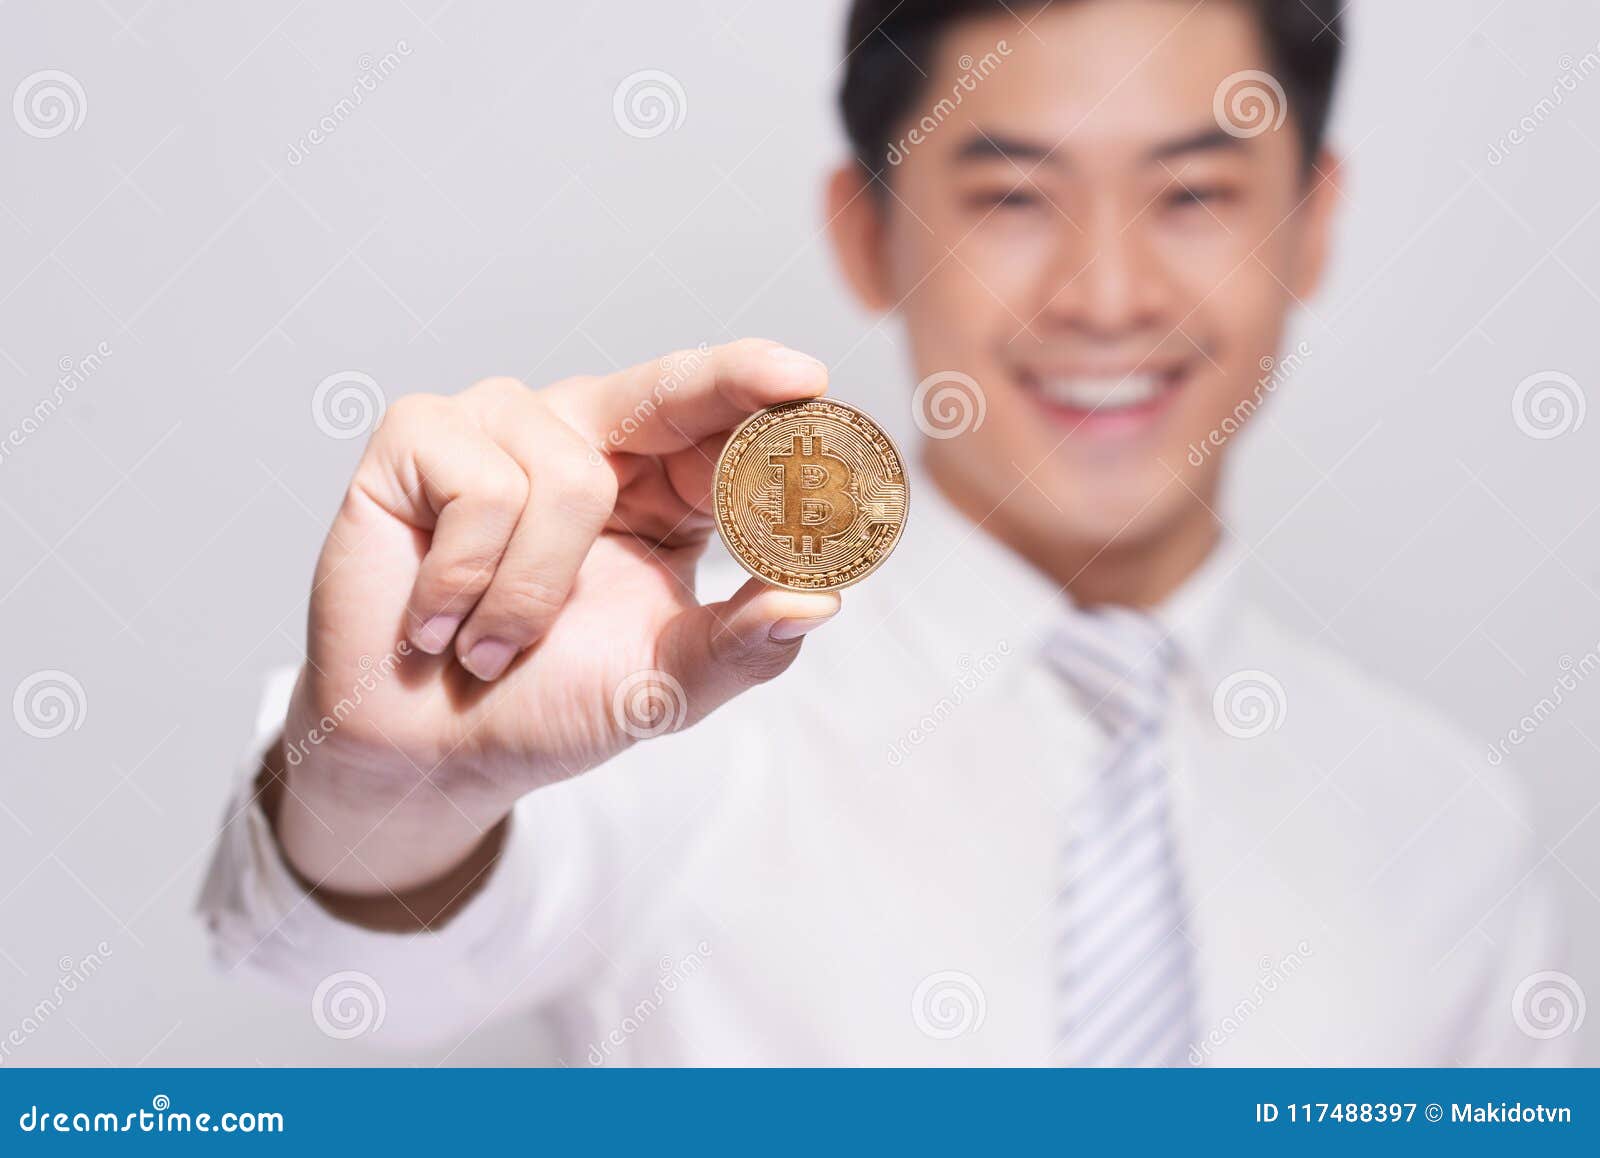 Businessman Show Bitcoin Gold Coin Confident New Investment In Stock Image Image Of Gold Money 117488397